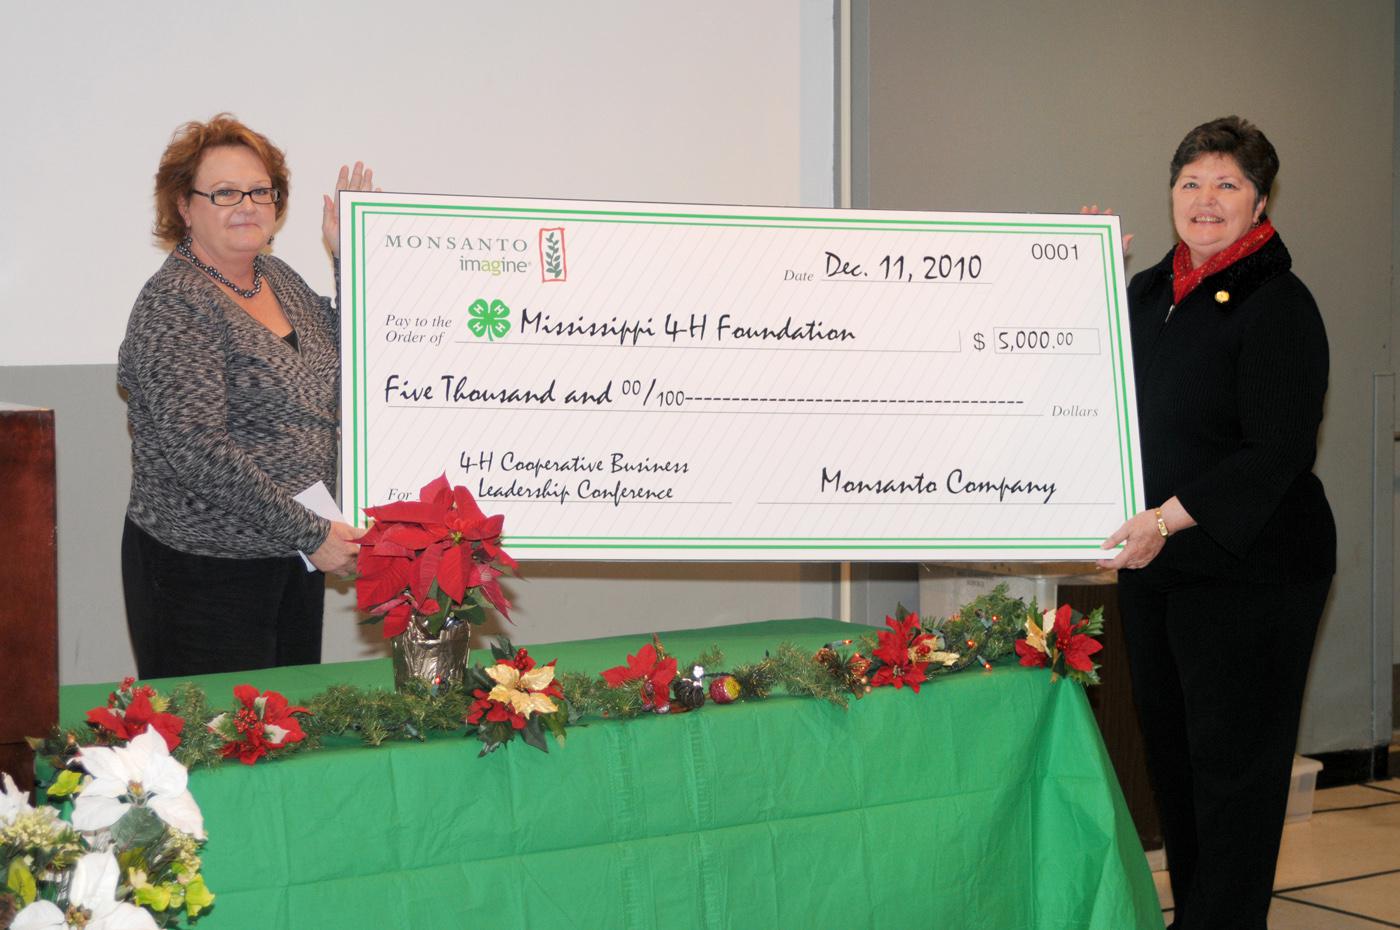 Monsanto Co. representative Derenda Stanley, left, presents Susan Holder a ceremonial check for $5,000 in support of 4-H. Holder, director of the 4-H Youth Program with the Mississippi State University Extension Service, said the funds will support the 4-H Cooperative Business Leadership Conference in 2011. This annual event is the reward given to senior-level 4-H members who placed first in their state competitions at 4-H Congress and state 4-H leadership team members. The primary objective of grants from 